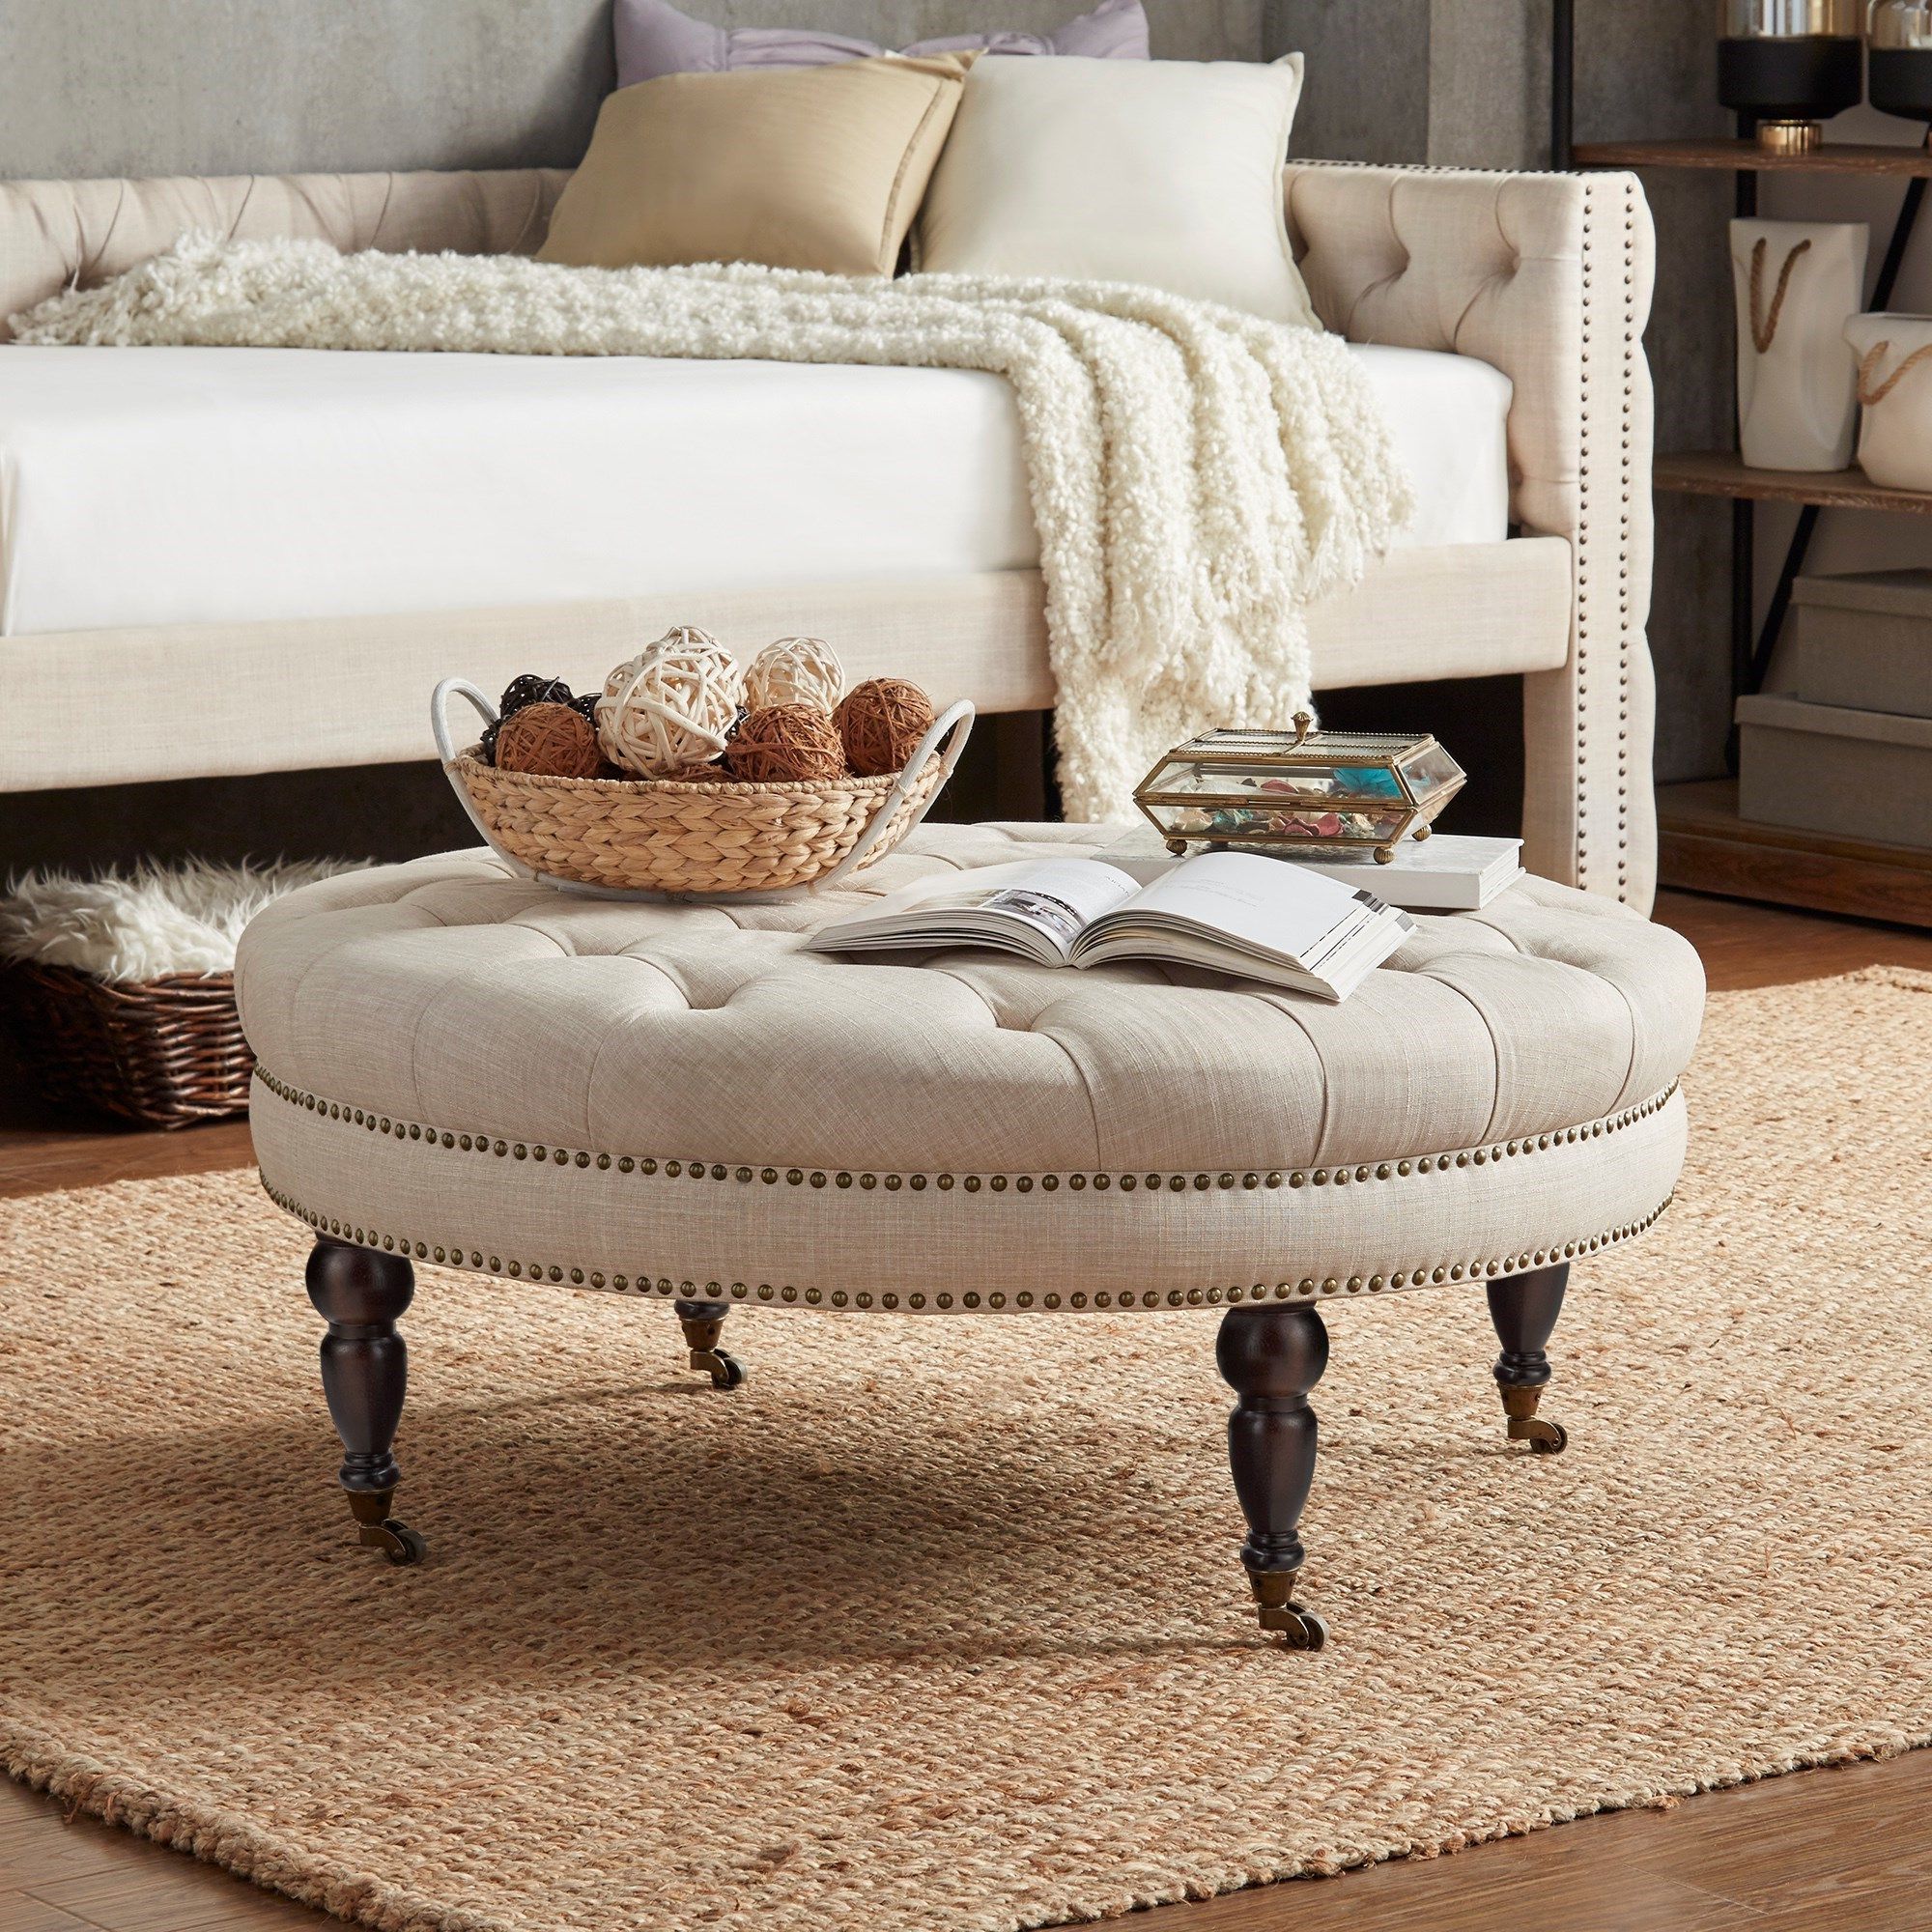 Widely Used Homelegance E208rd Traditional Round Tufted Bench Ottoman With Casters With Round Pouf Ottomans (View 10 of 10)